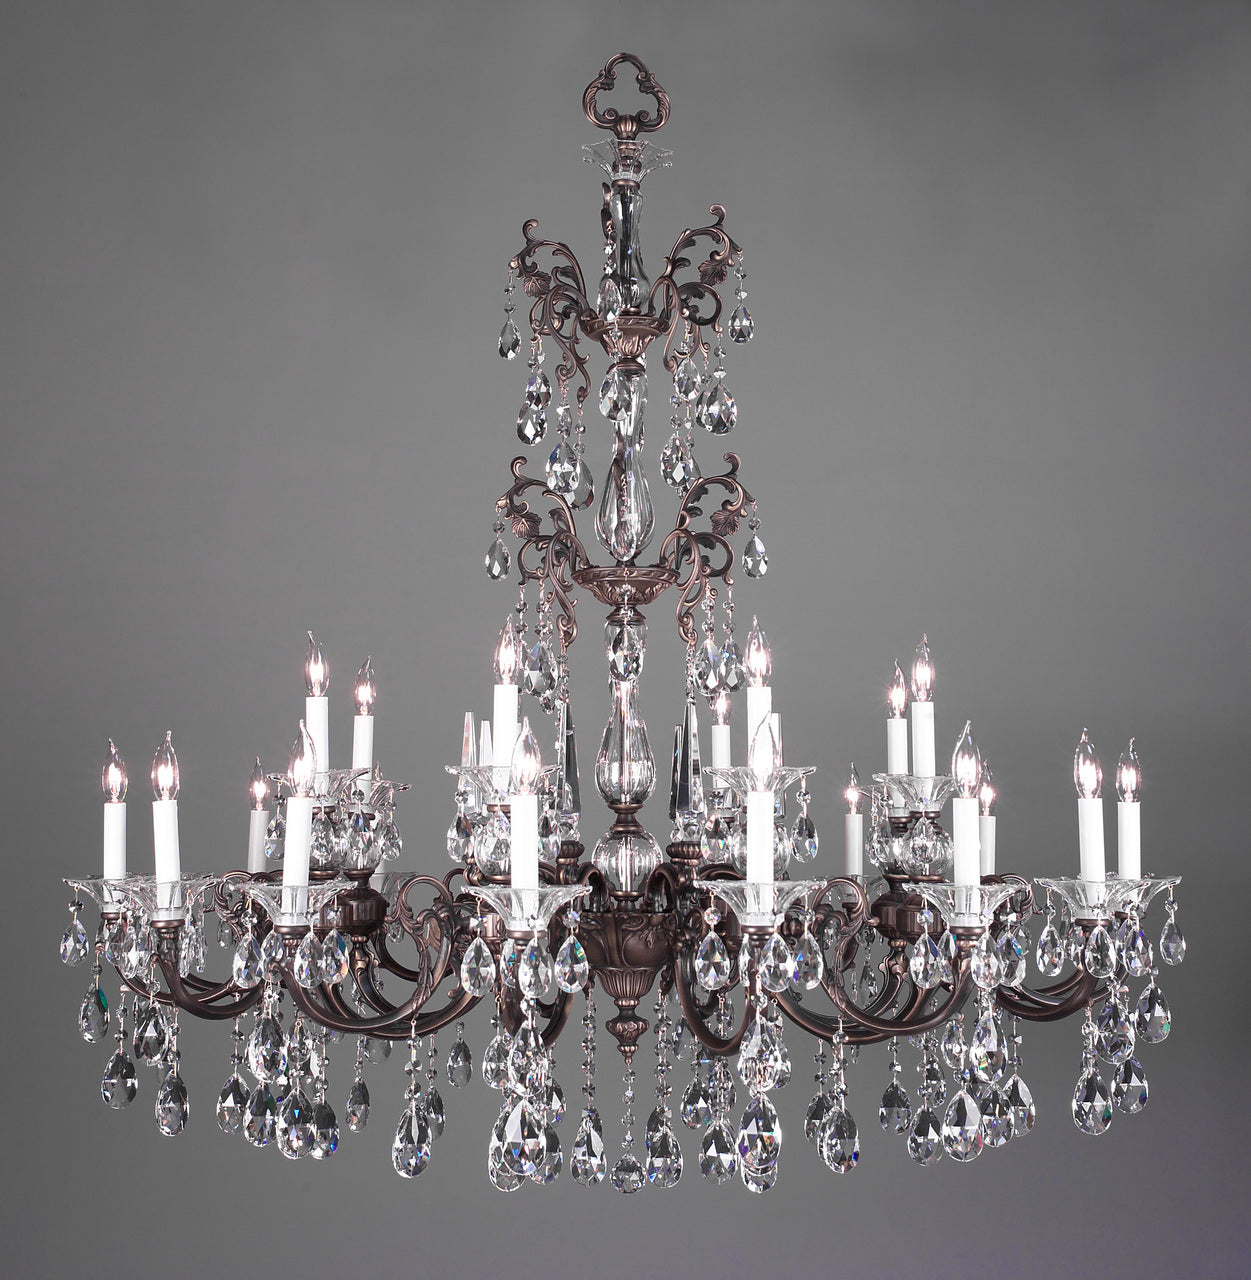 Classic Lighting 57065 RB CP Via Lombardi Crystal Chandelier in Roman Bronze (Imported from Spain)